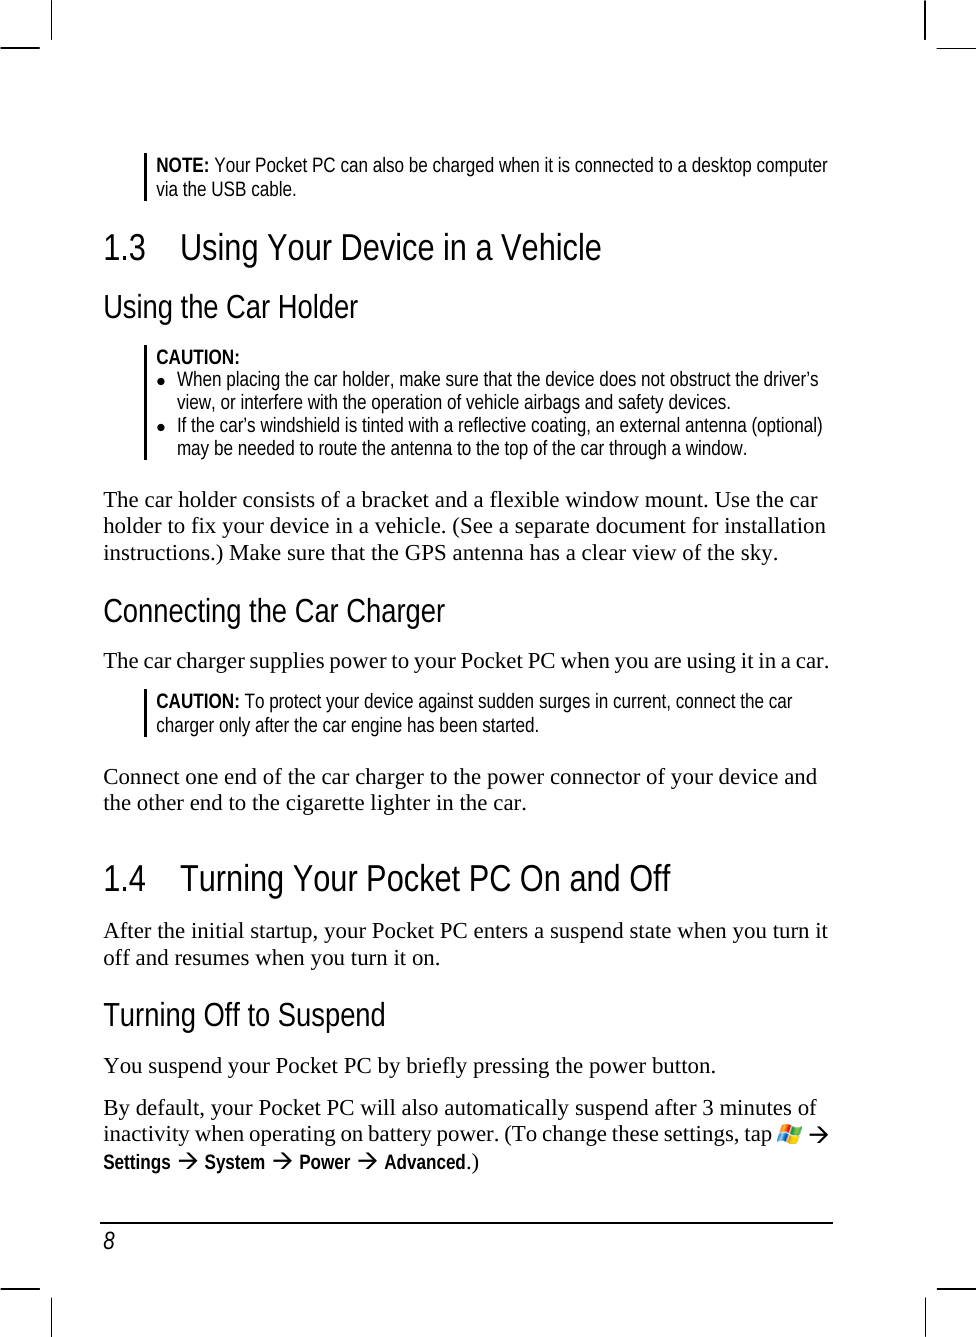  8  NOTE: Your Pocket PC can also be charged when it is connected to a desktop computer via the USB cable. 1.3 Using Your Device in a Vehicle Using the Car Holder CAUTION: z When placing the car holder, make sure that the device does not obstruct the driver’s view, or interfere with the operation of vehicle airbags and safety devices. z If the car’s windshield is tinted with a reflective coating, an external antenna (optional) may be needed to route the antenna to the top of the car through a window.  The car holder consists of a bracket and a flexible window mount. Use the car holder to fix your device in a vehicle. (See a separate document for installation instructions.) Make sure that the GPS antenna has a clear view of the sky. Connecting the Car Charger The car charger supplies power to your Pocket PC when you are using it in a car.  CAUTION: To protect your device against sudden surges in current, connect the car charger only after the car engine has been started.  Connect one end of the car charger to the power connector of your device and the other end to the cigarette lighter in the car.  1.4 Turning Your Pocket PC On and Off After the initial startup, your Pocket PC enters a suspend state when you turn it off and resumes when you turn it on. Turning Off to Suspend You suspend your Pocket PC by briefly pressing the power button. By default, your Pocket PC will also automatically suspend after 3 minutes of inactivity when operating on battery power. (To change these settings, tap   Æ Settings Æ System Æ Power Æ Advanced.) 